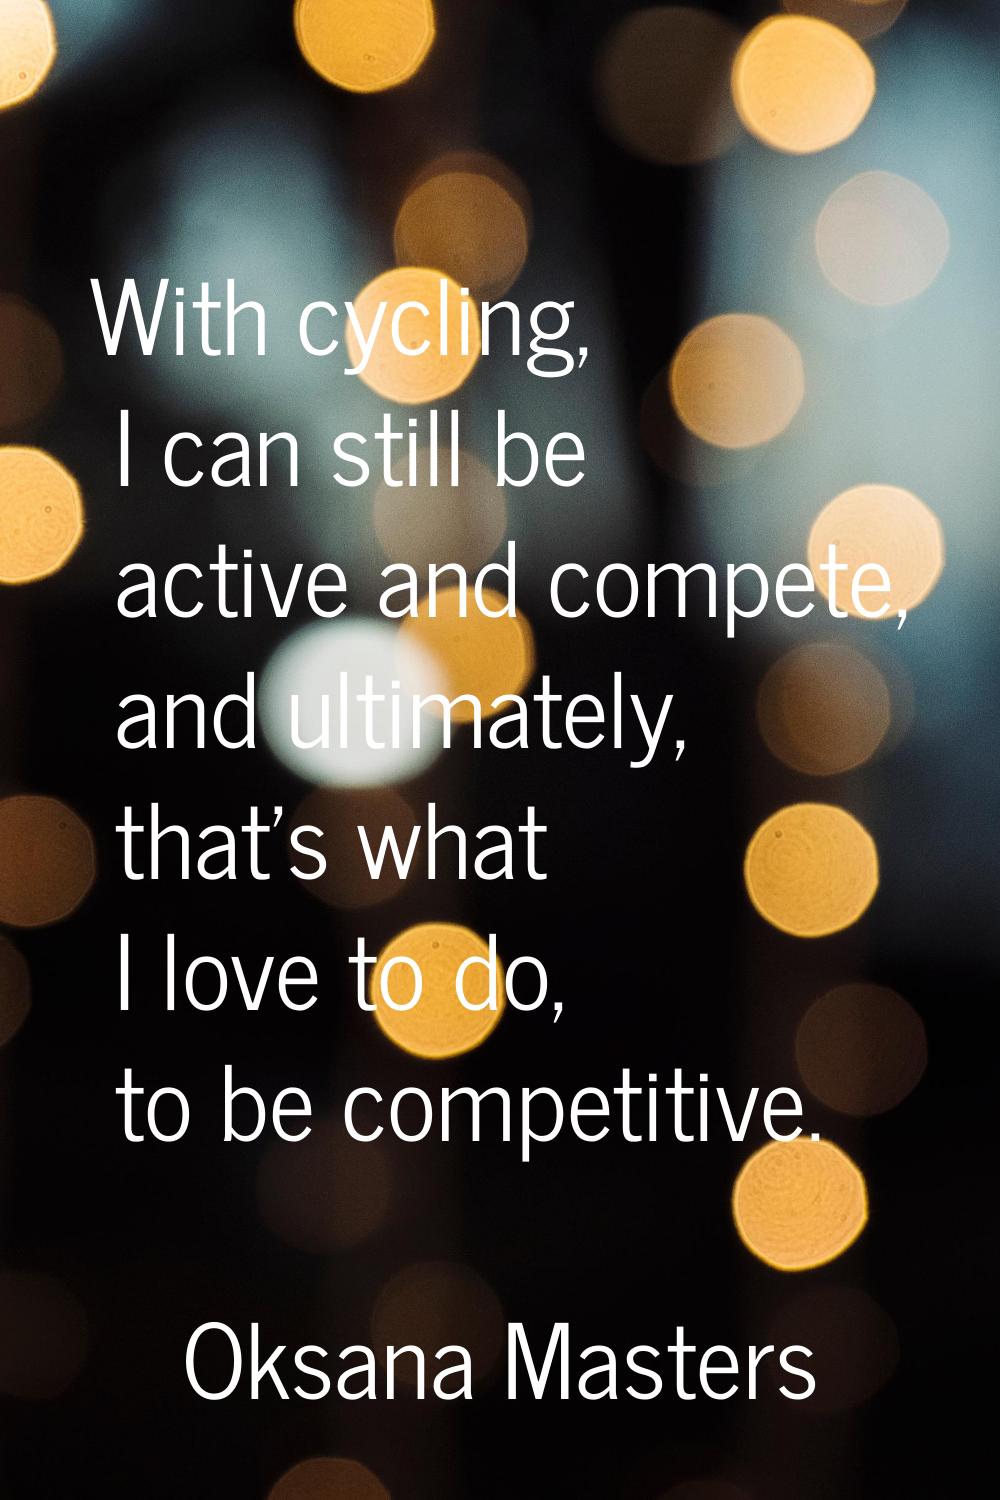 With cycling, I can still be active and compete, and ultimately, that's what I love to do, to be co